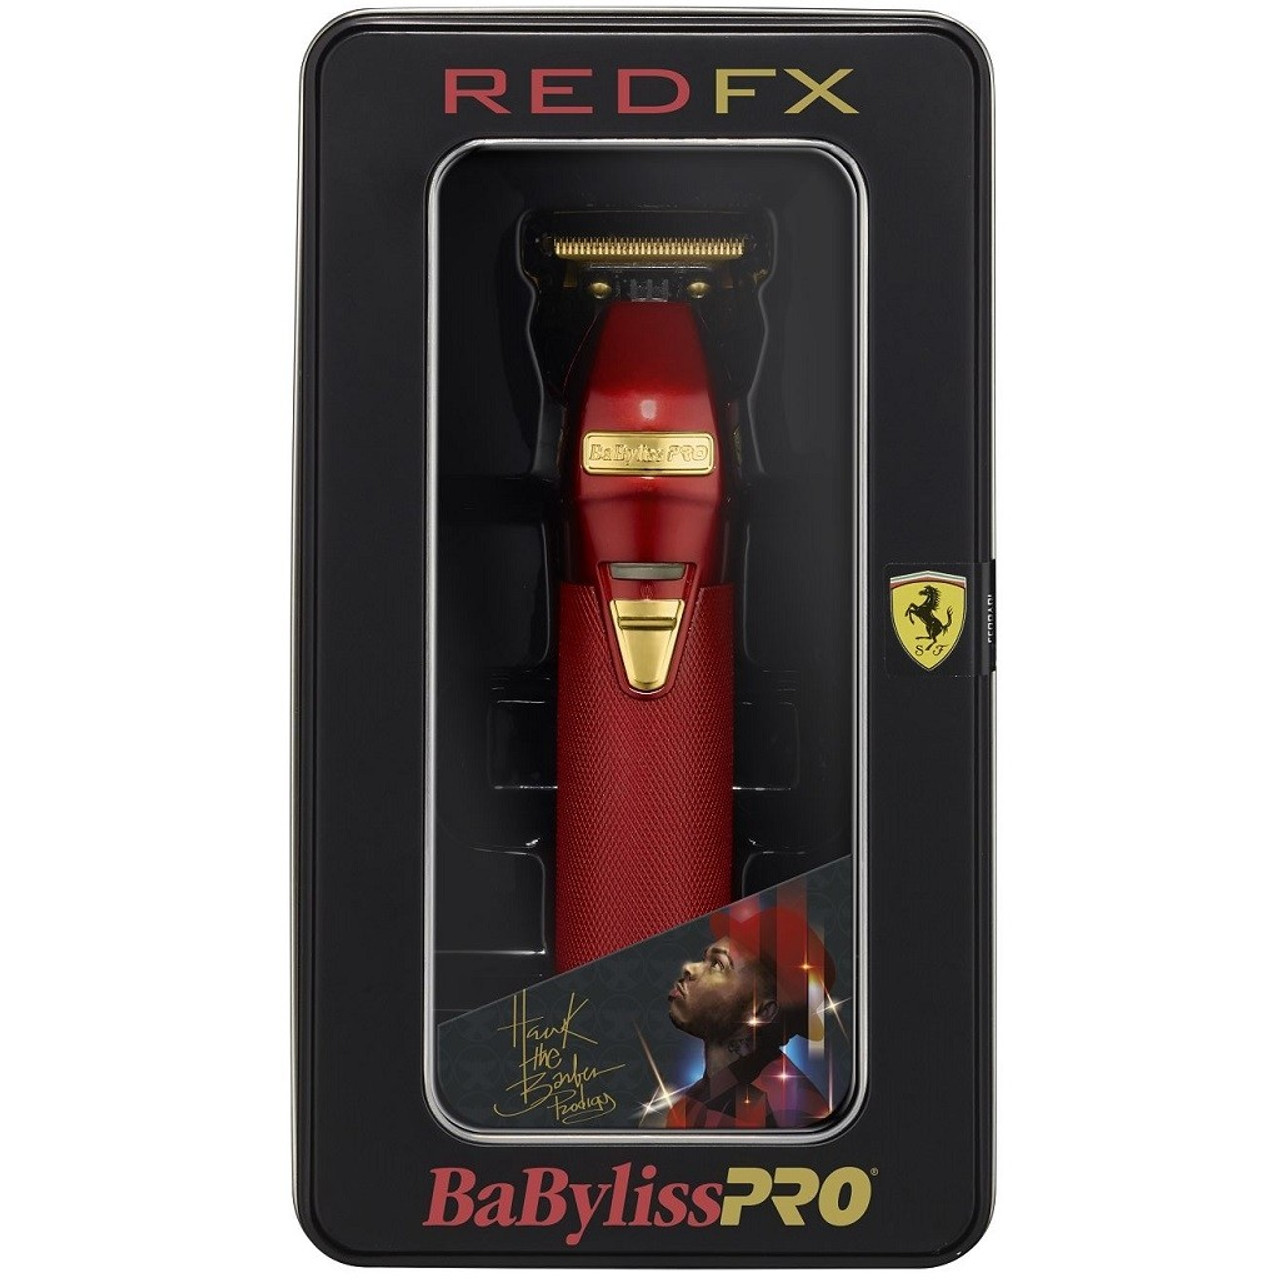 babyliss pro red fx trimmer